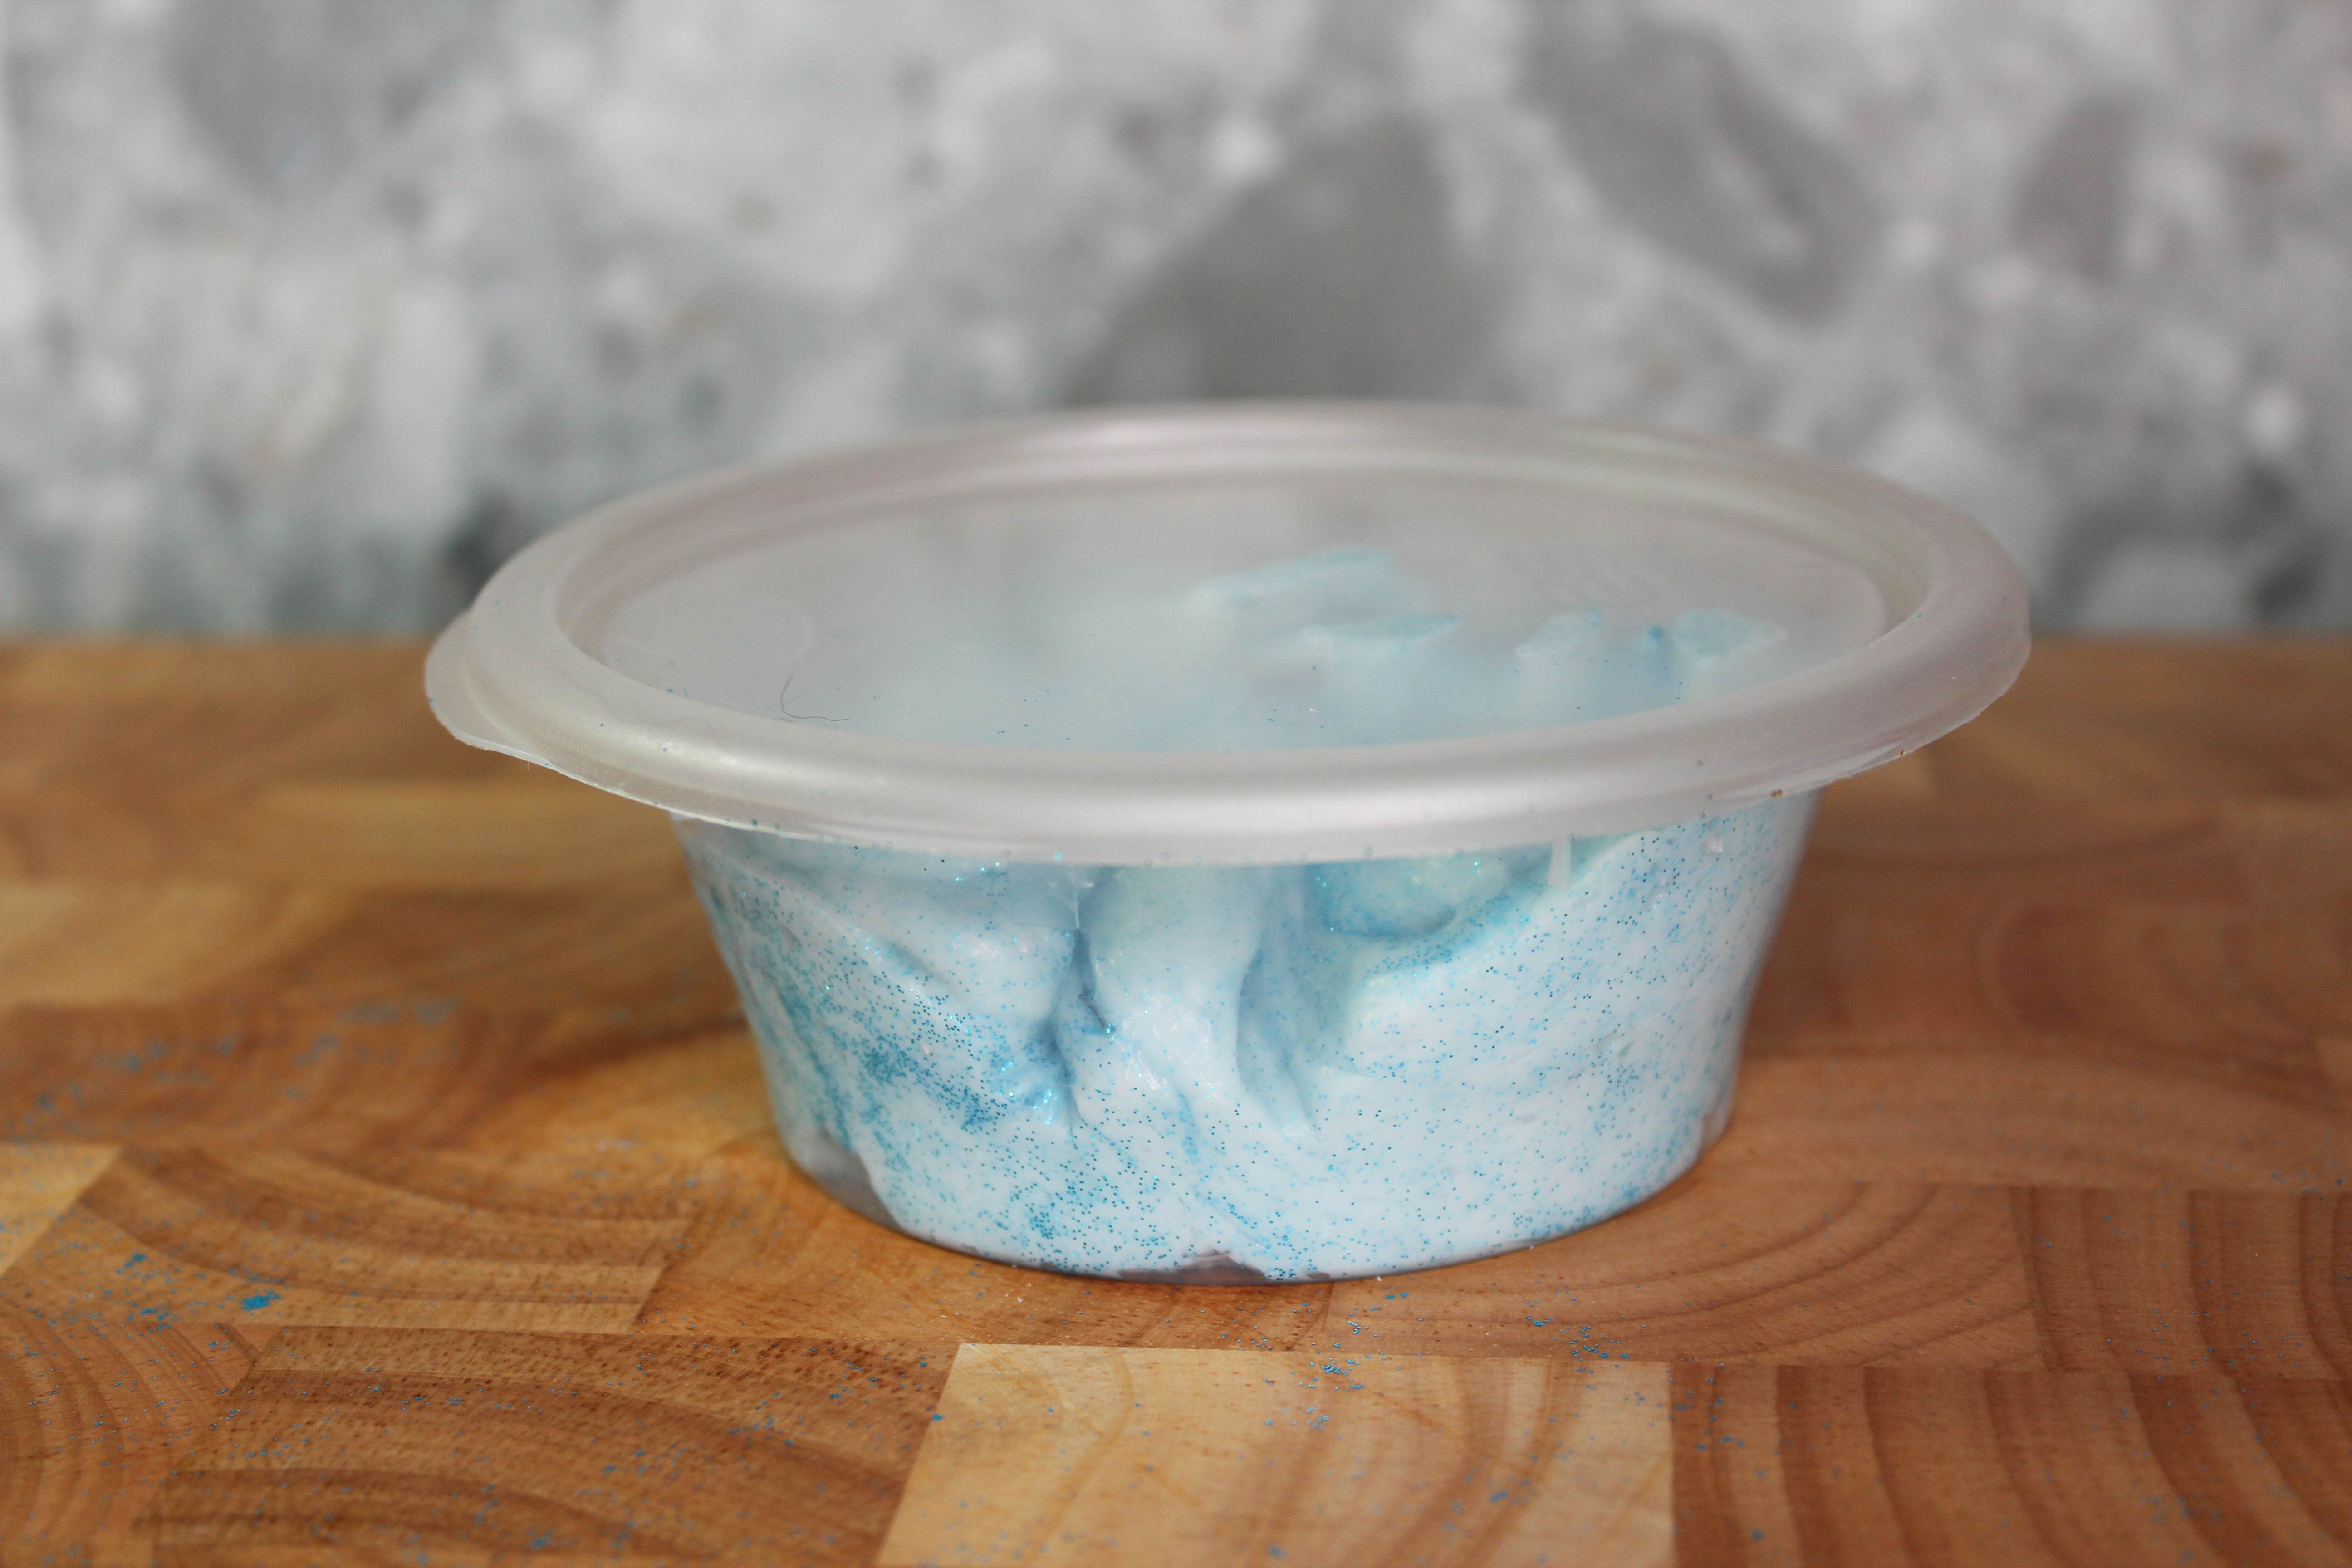 How to store slime in an air tight container